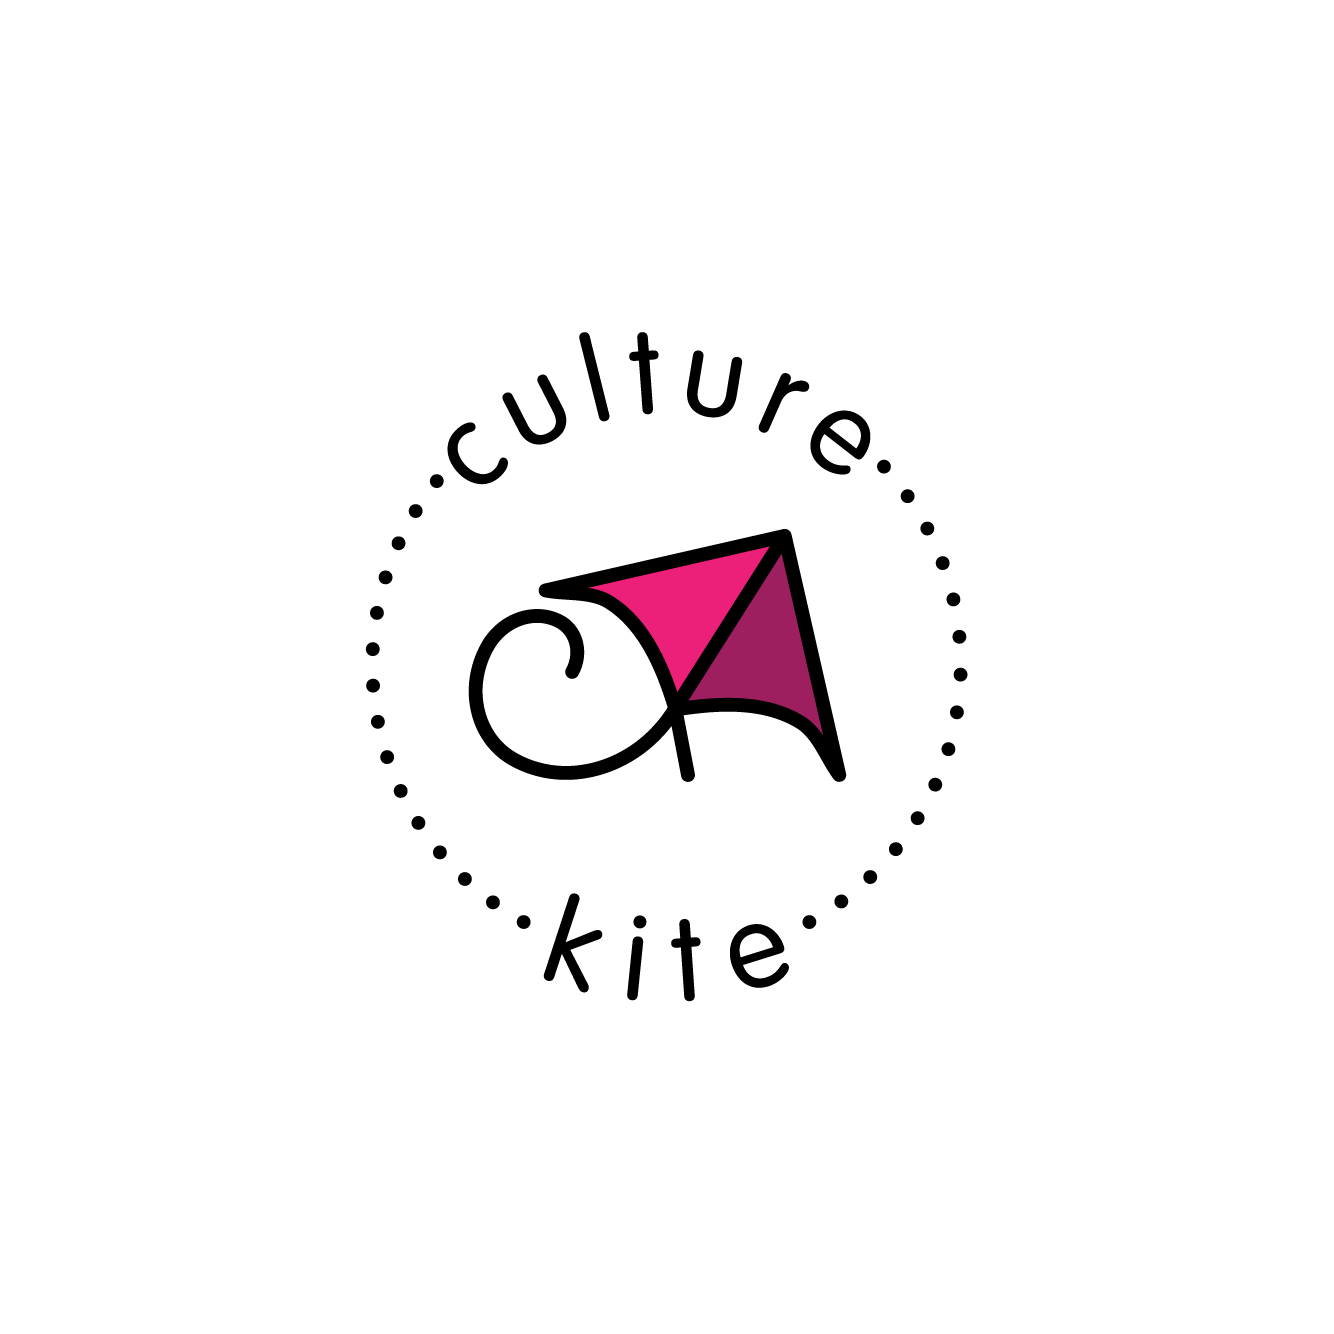 brand design by blade_feature logo_culture kite.png